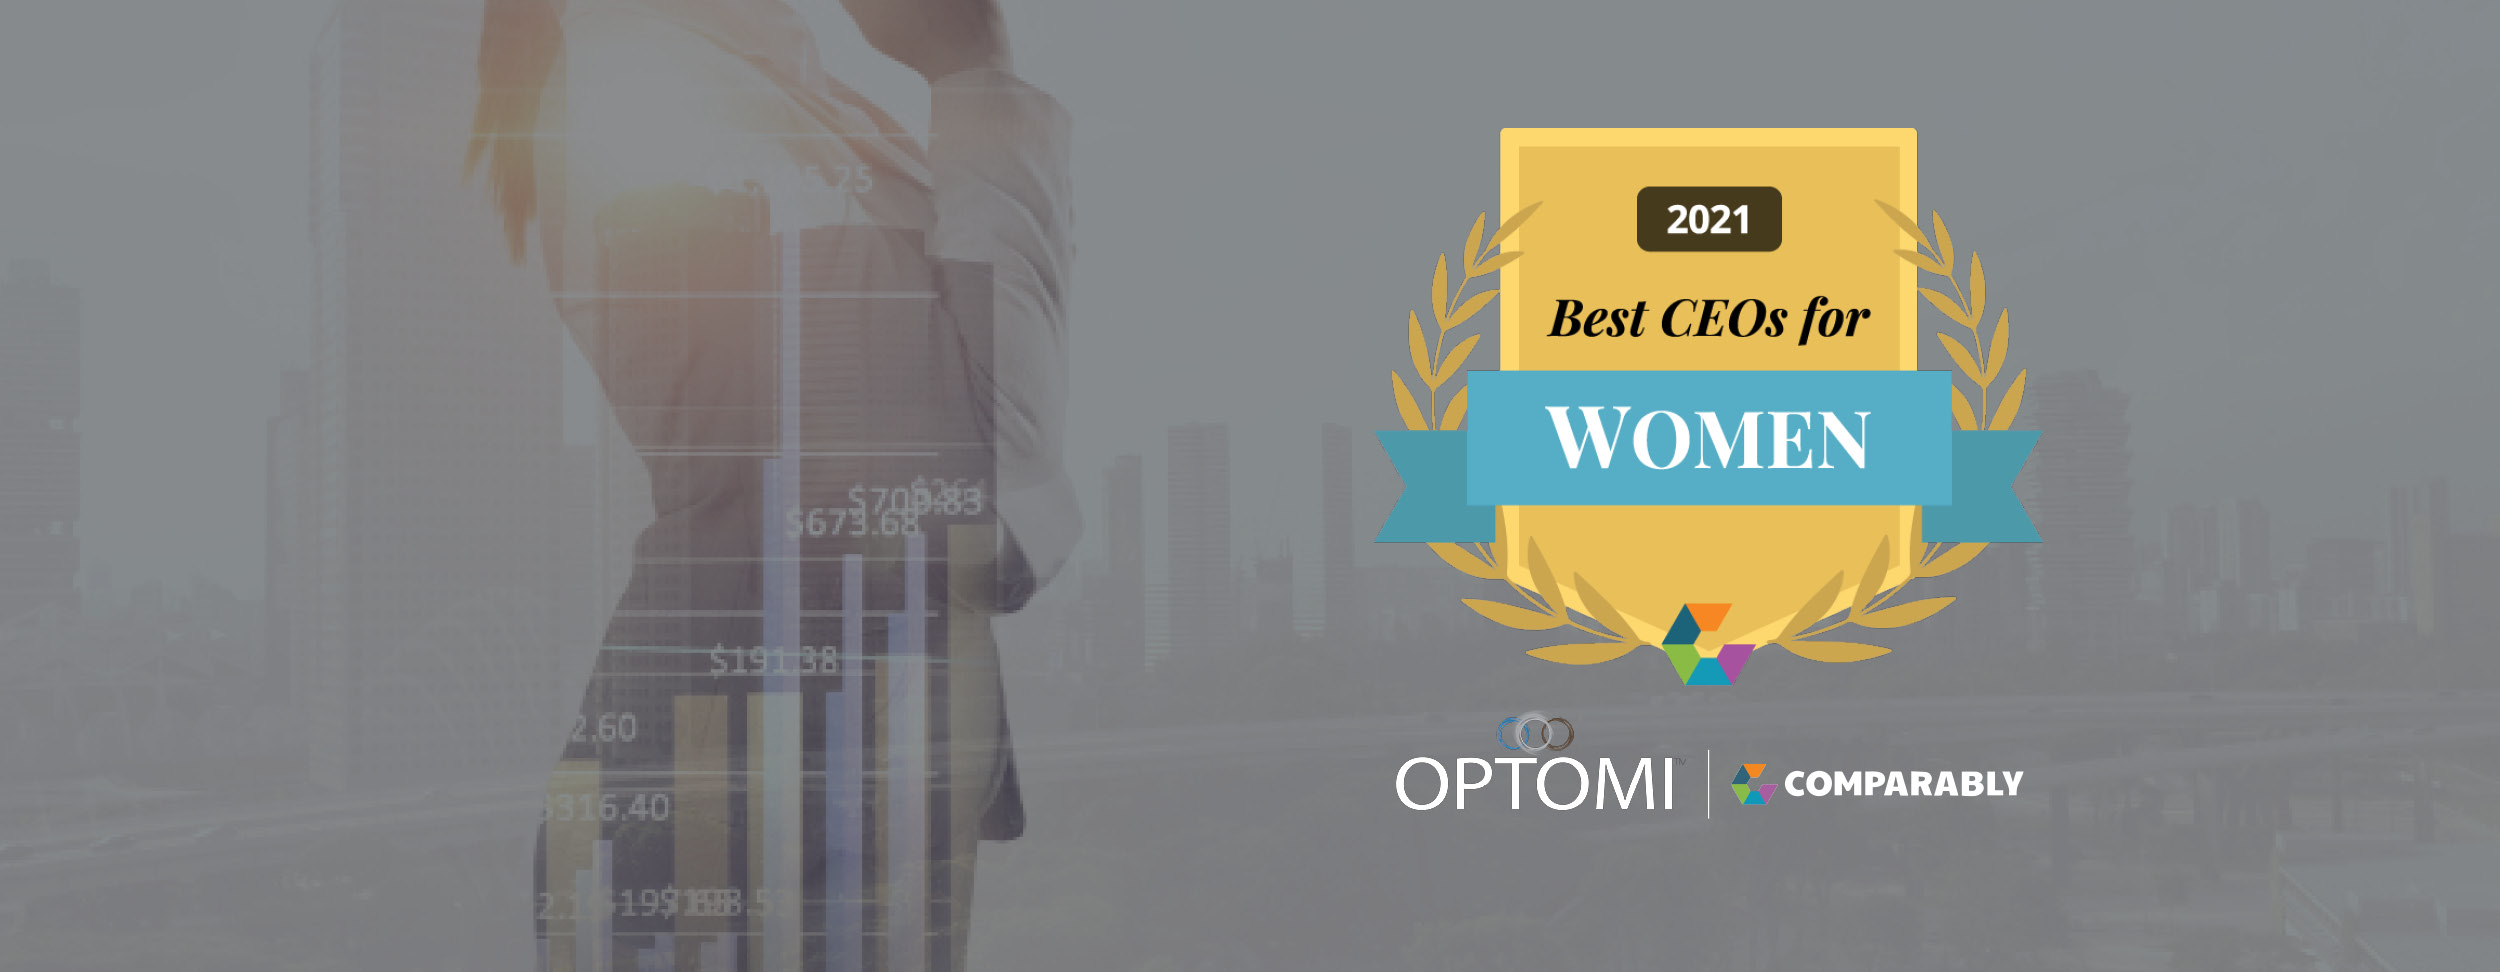 best-CEO-for-women-comparably-optomi-professional-services-award-winning